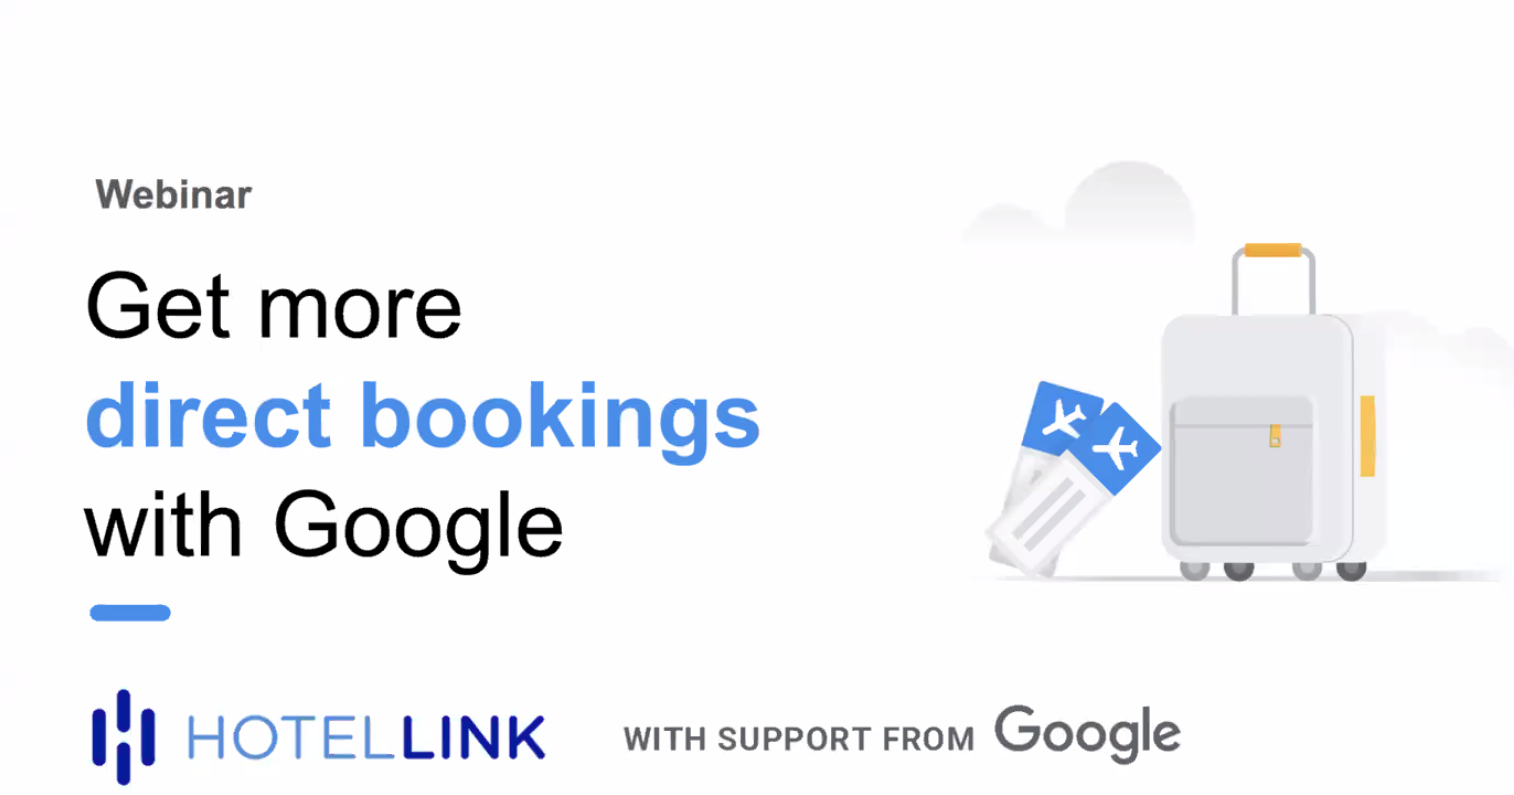 Google’s Free Booking Link - A fasten way to find a perfect hotel